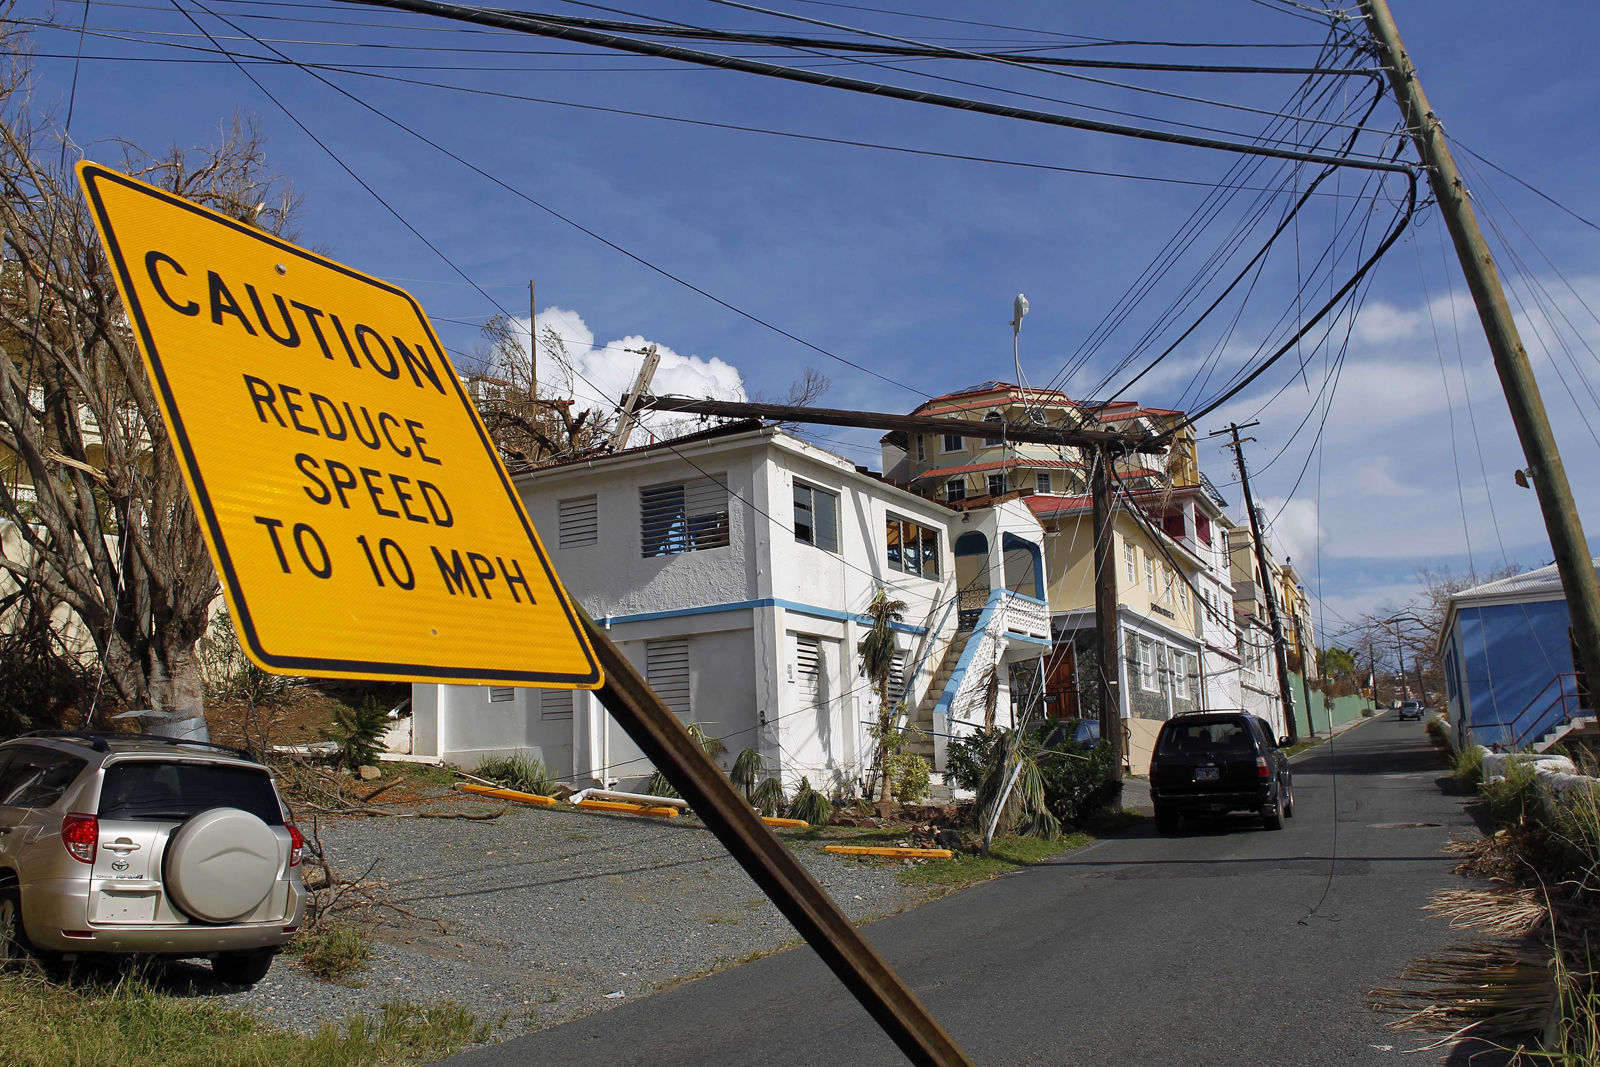 A speed limit sign stands tilted and a  power line that snapped it half lays on a building, after the passage of Hurricane Irma in Charlotte Amalie, St. Thomas, U.S. Virgin Islands, Sunday, Sept. 10, 2017.  The storm ravaged such lush resort islands as St. Martin, St. Barts, St. Thomas, Barbuda and Anguilla. (AP Photo/Ricardo Arduengo)